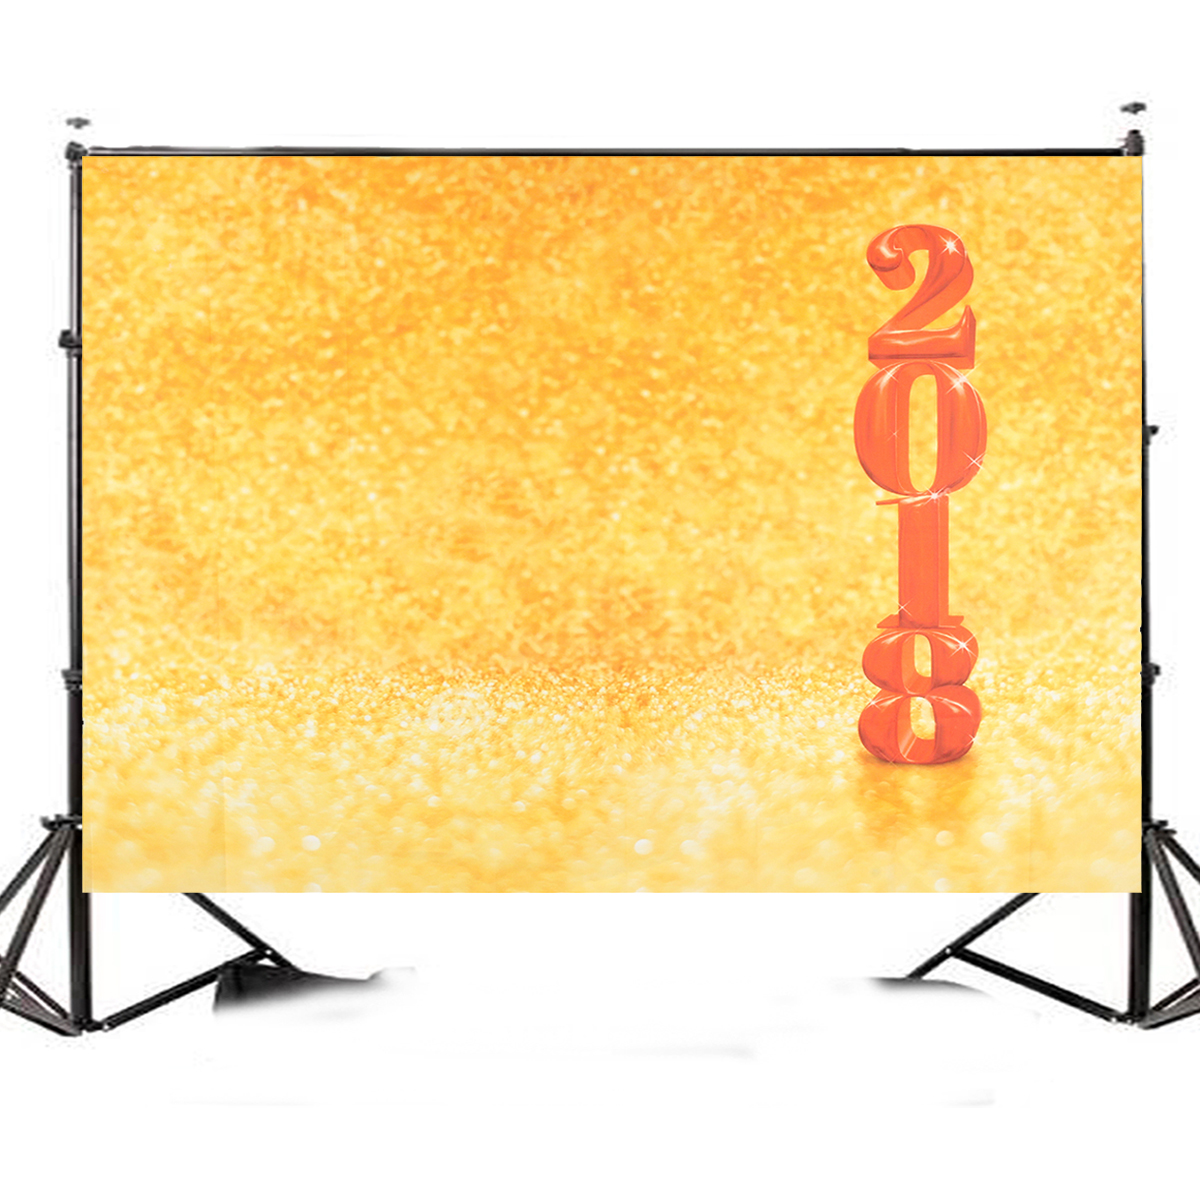 7x5ft-New-Year-Golden-Bright-Stars-Photography-Backdrop-Studio-Prop-Background-1377383-2